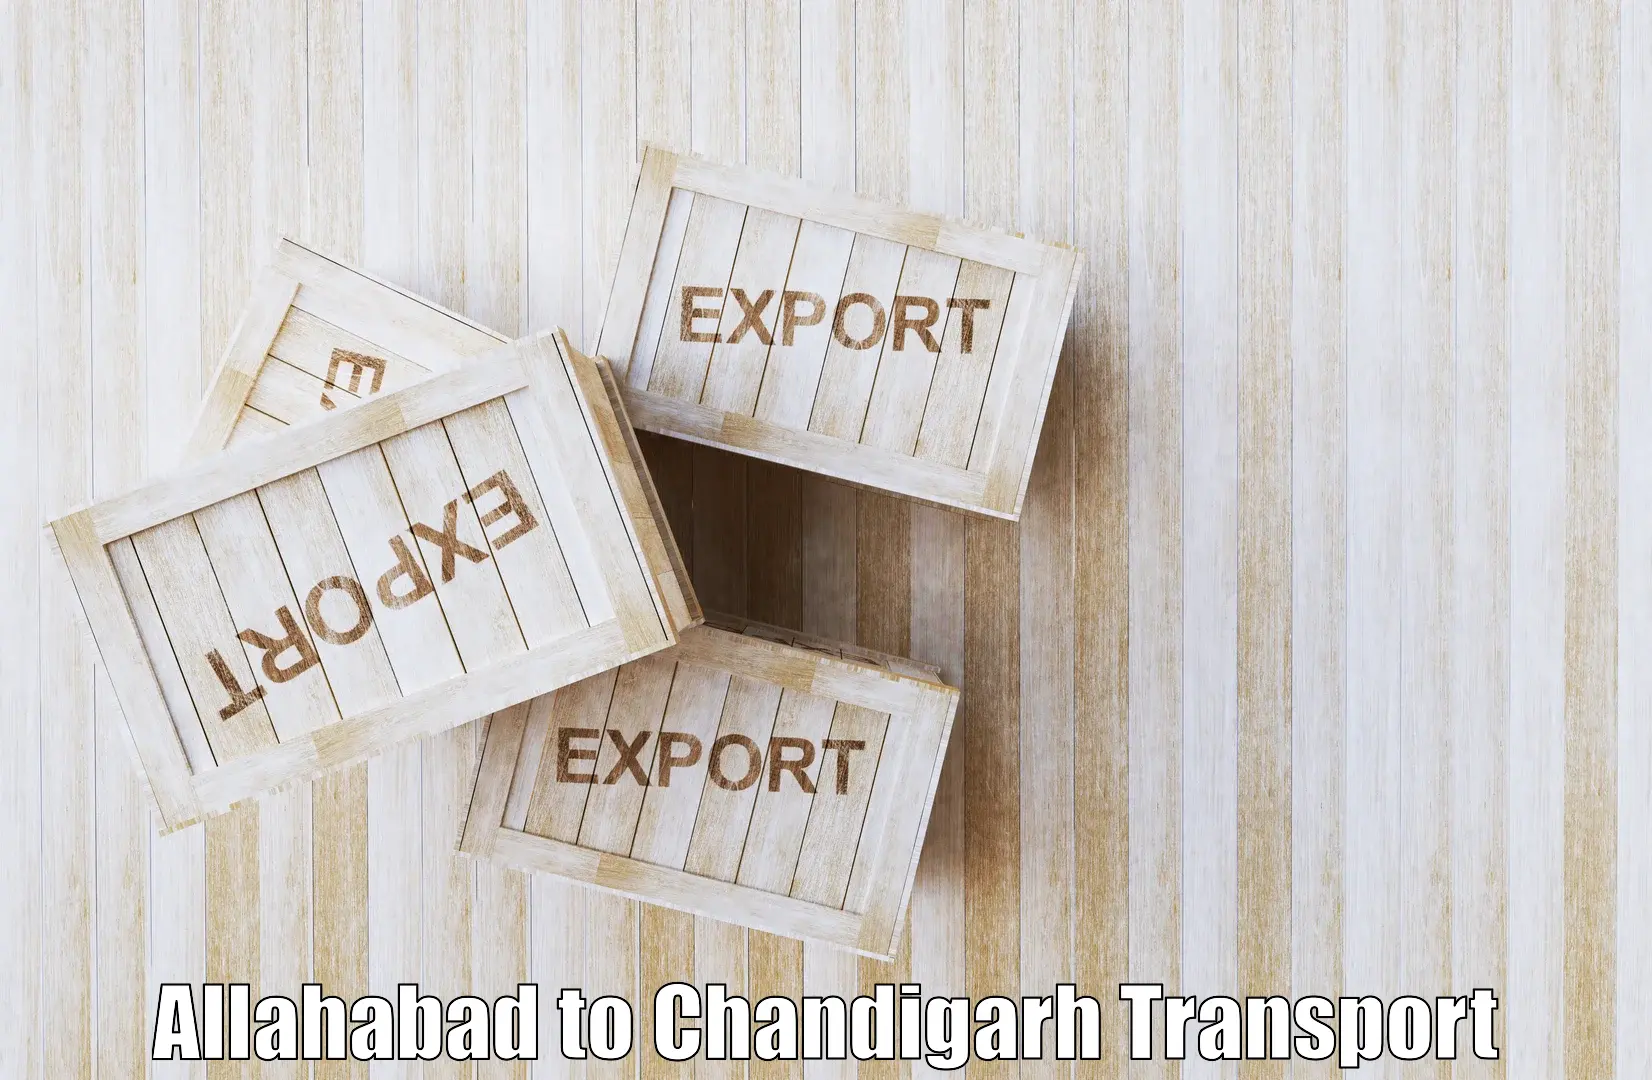 Nearby transport service Allahabad to Chandigarh